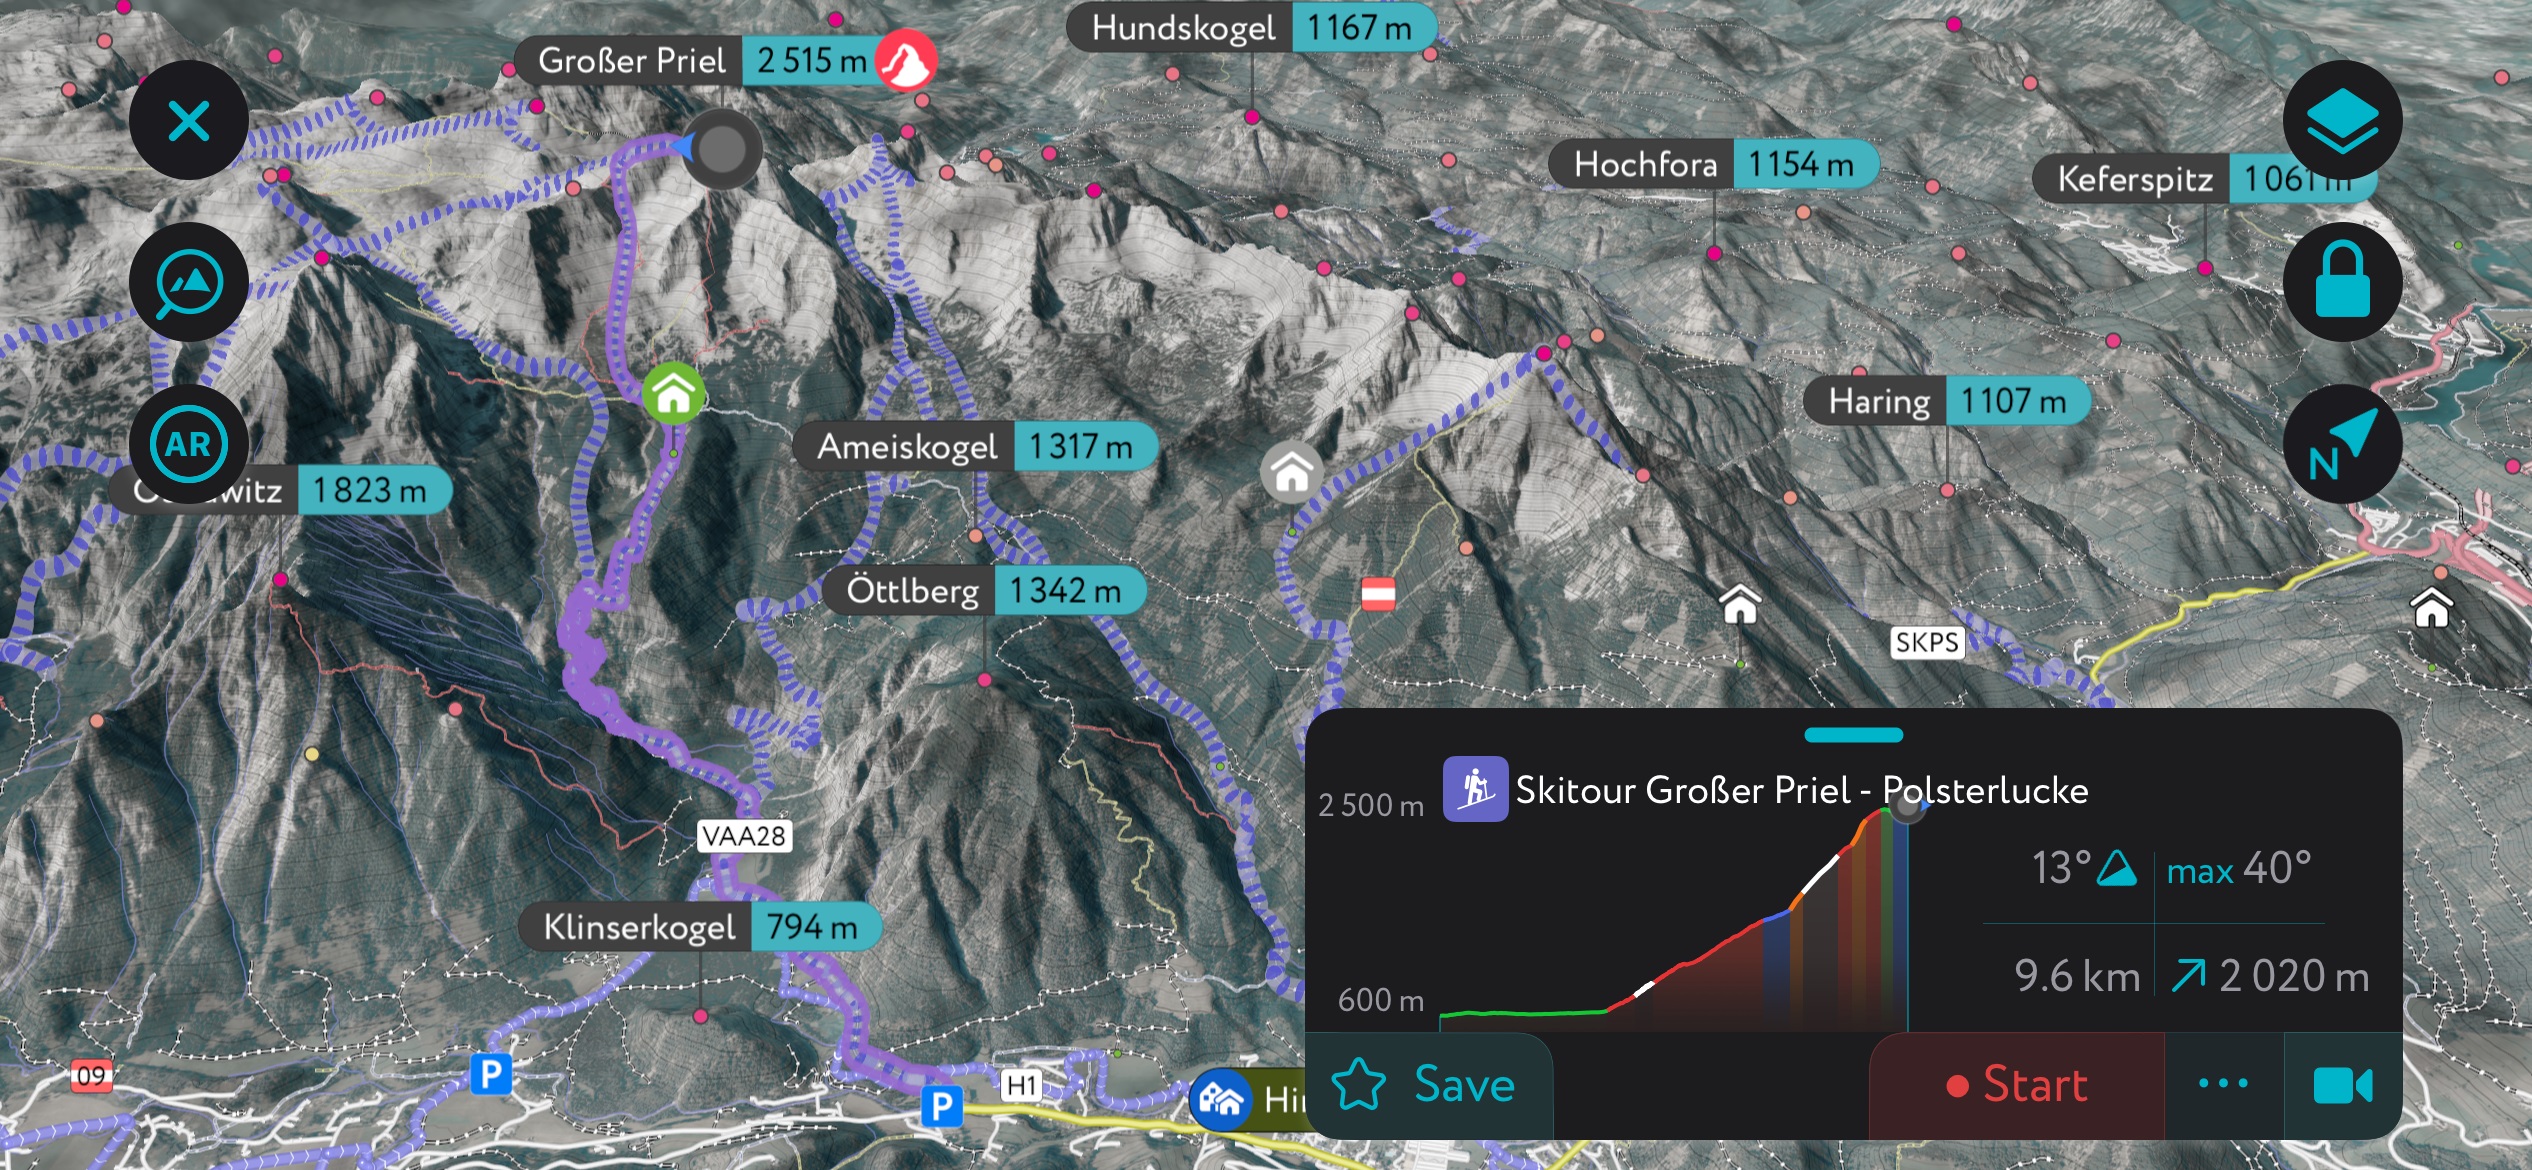 A generation of local hiking routes in the Totes Gebirge using PeakVisor’s mobile app. Totes Gebirge